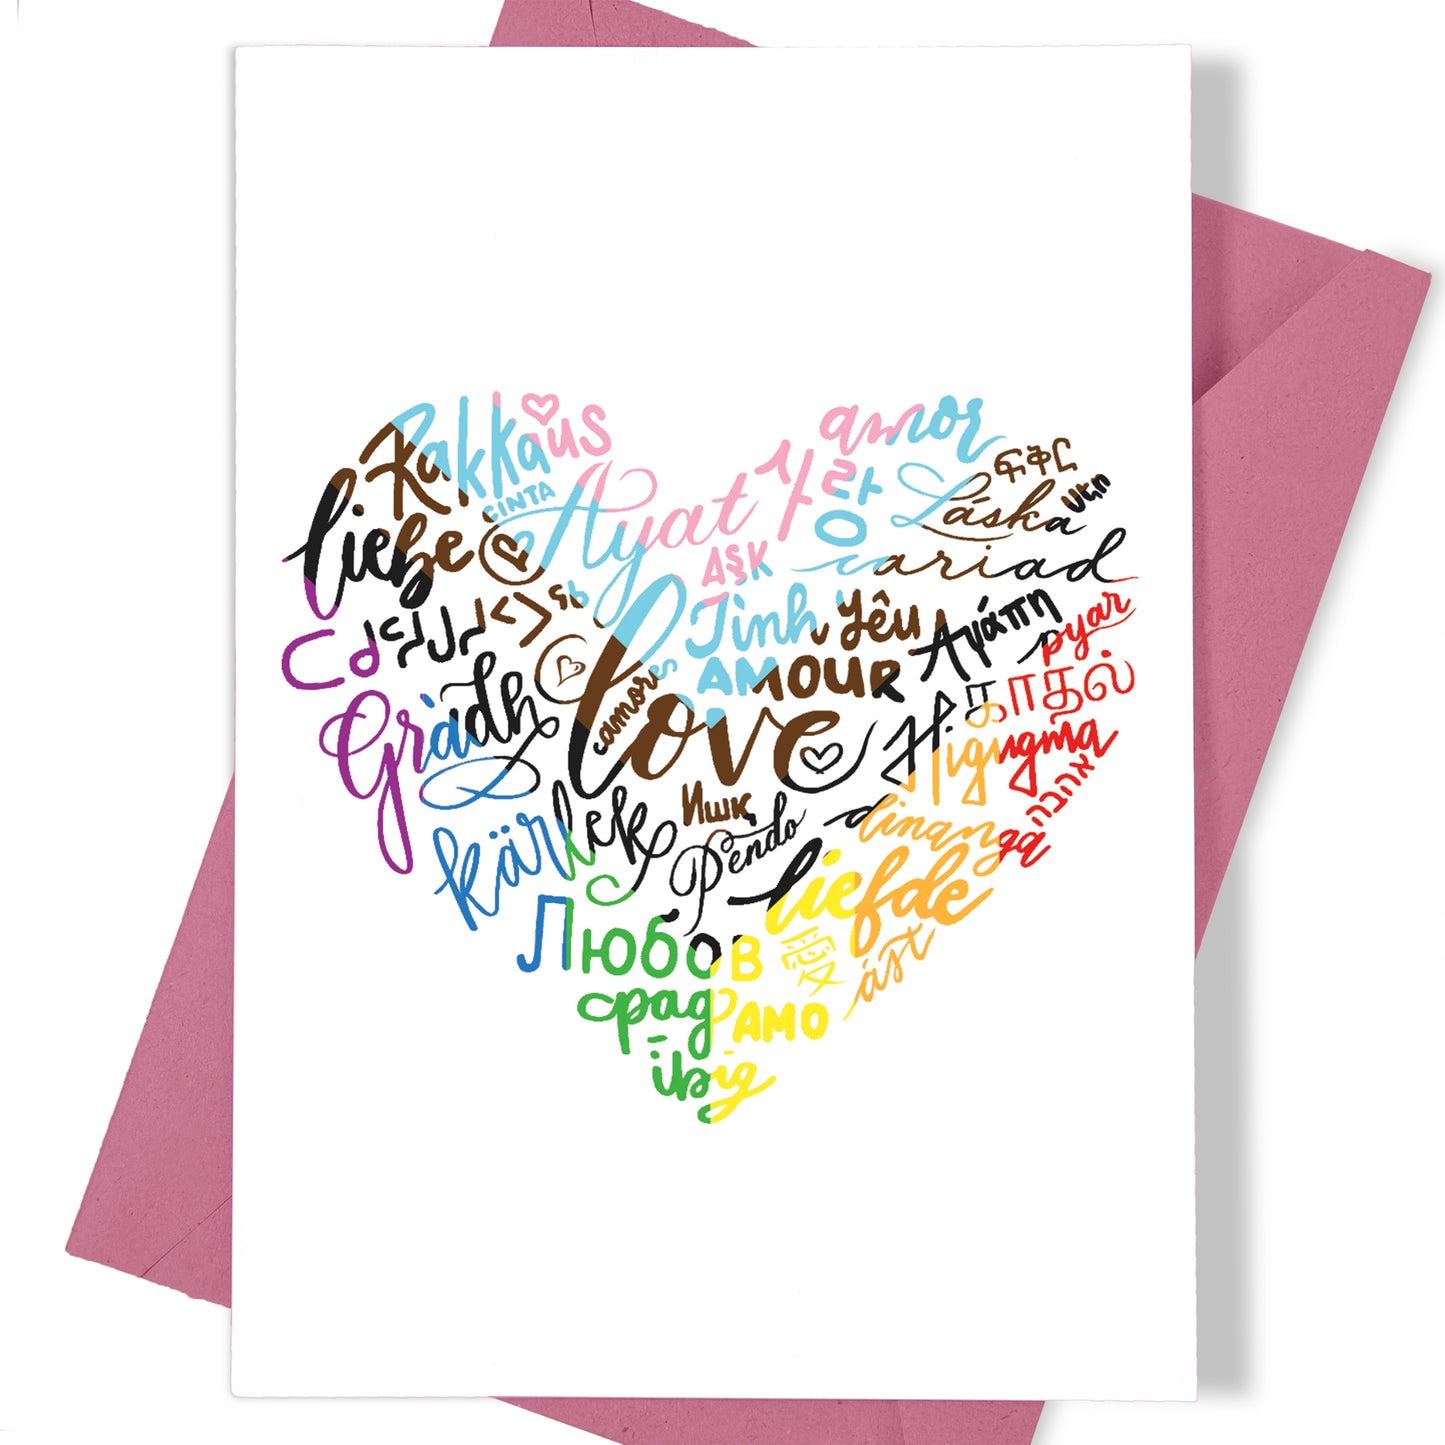 A thumbnail view of the greeting card: "The Language of Love"